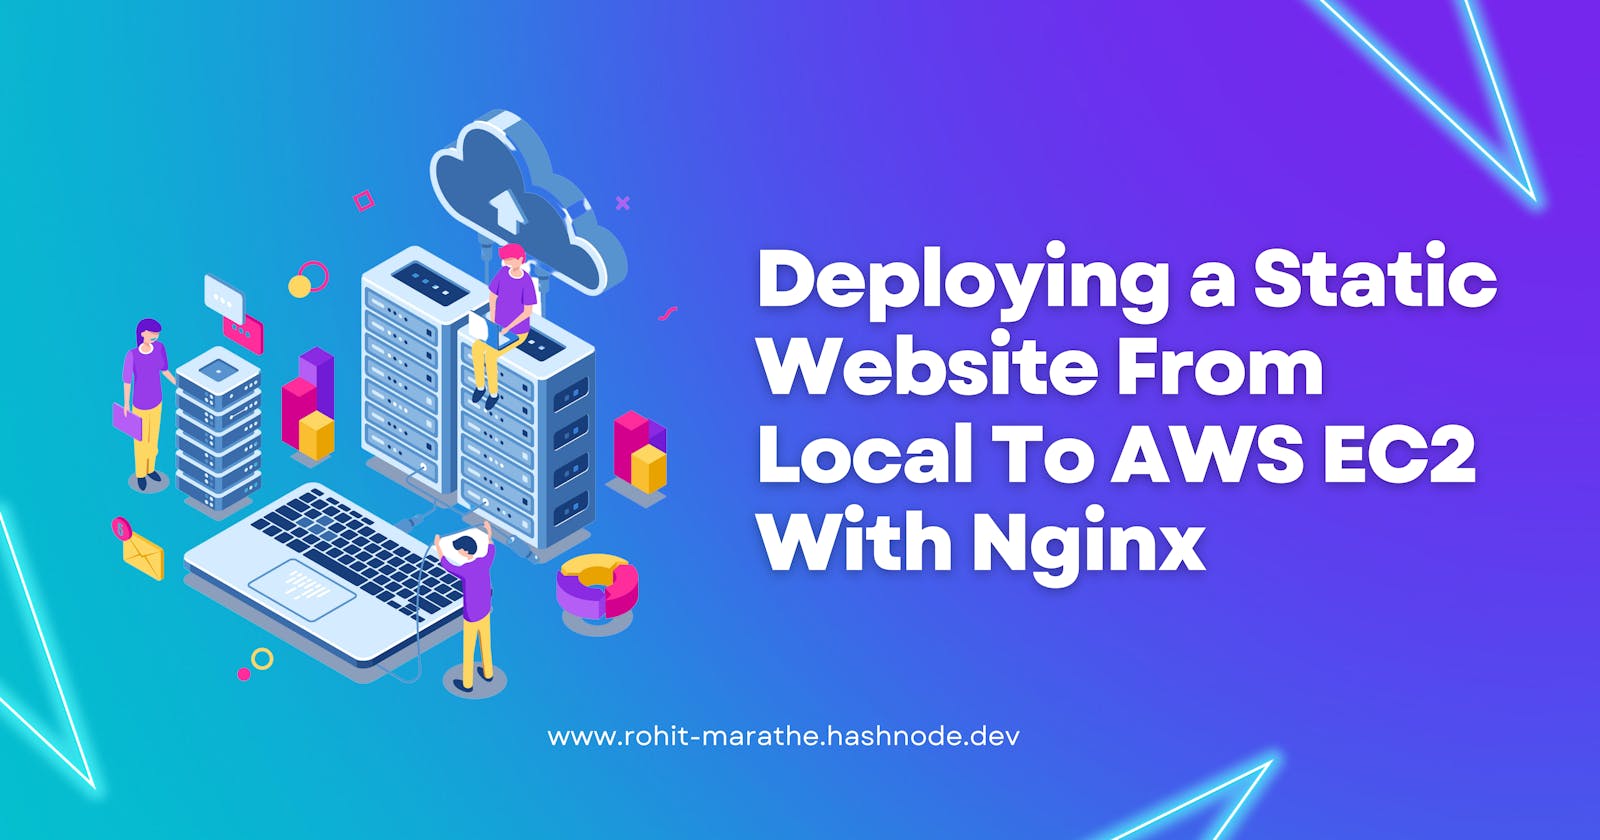 Deploying a Static Website From Local To AWS EC2 With Nginx